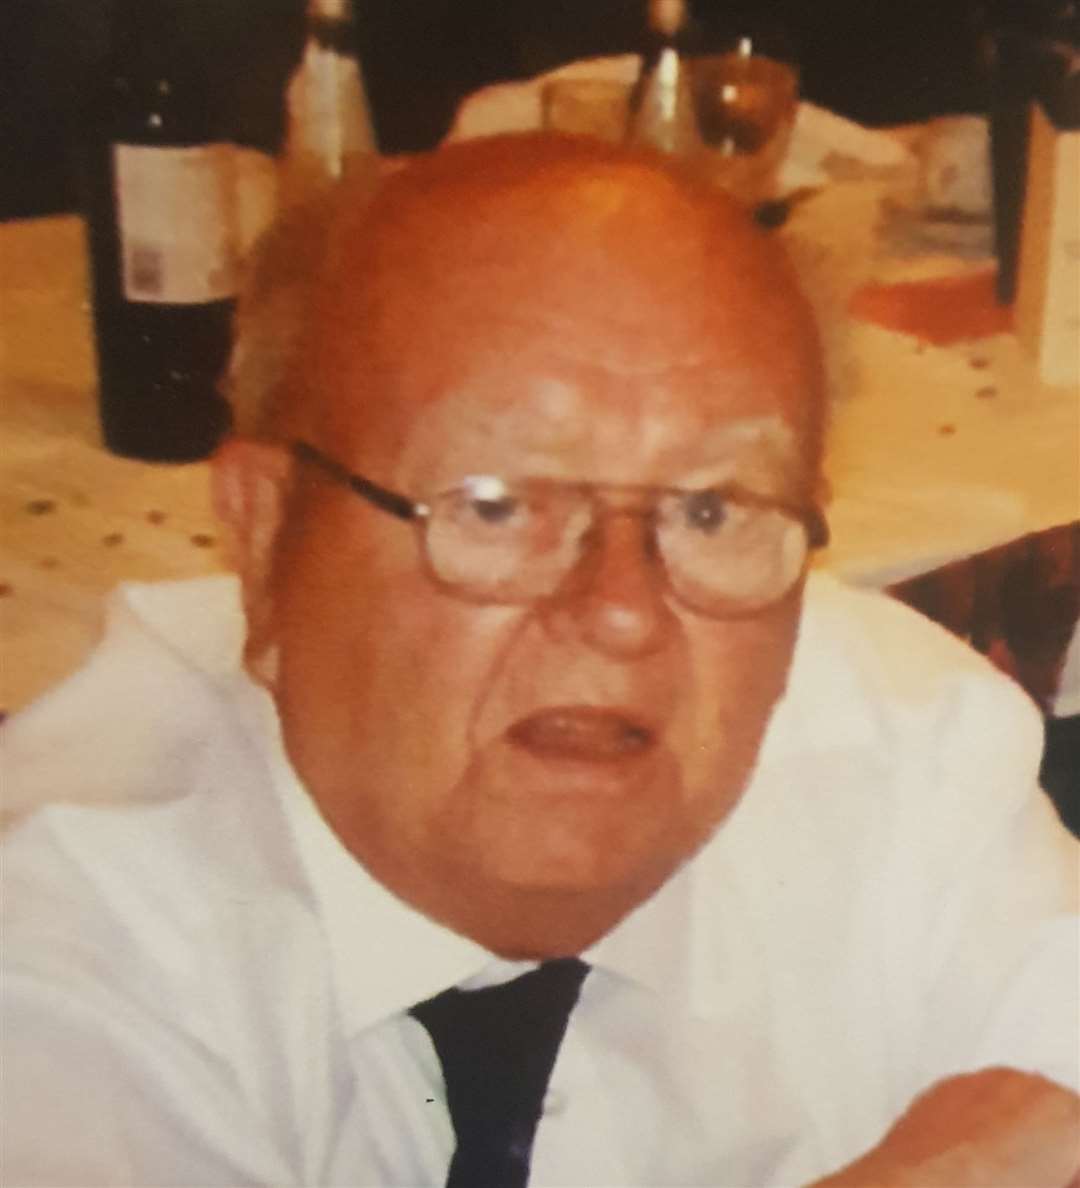 Arthur John Youngs, of Twydall died after going into cardiac arrest in the car park at Twydall Shops (12132683)